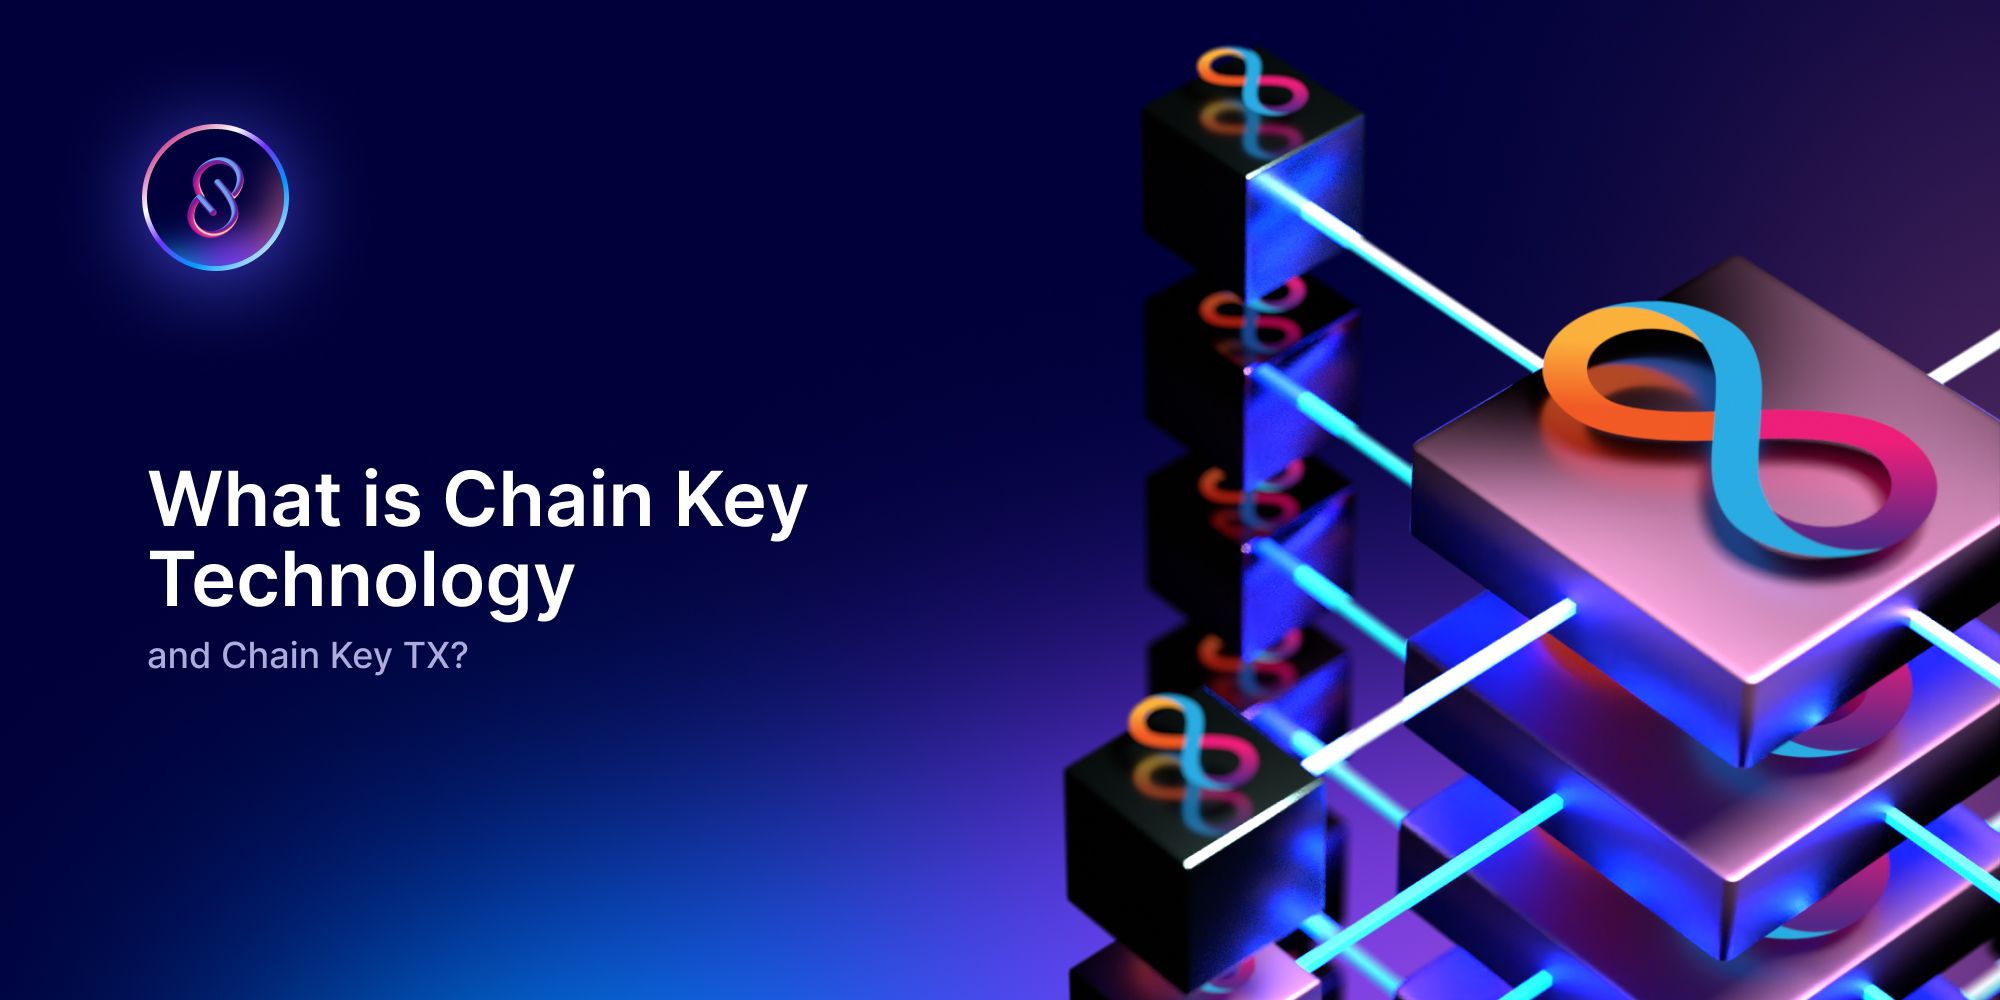 What is Chain Key Technology and Chain Key TX?